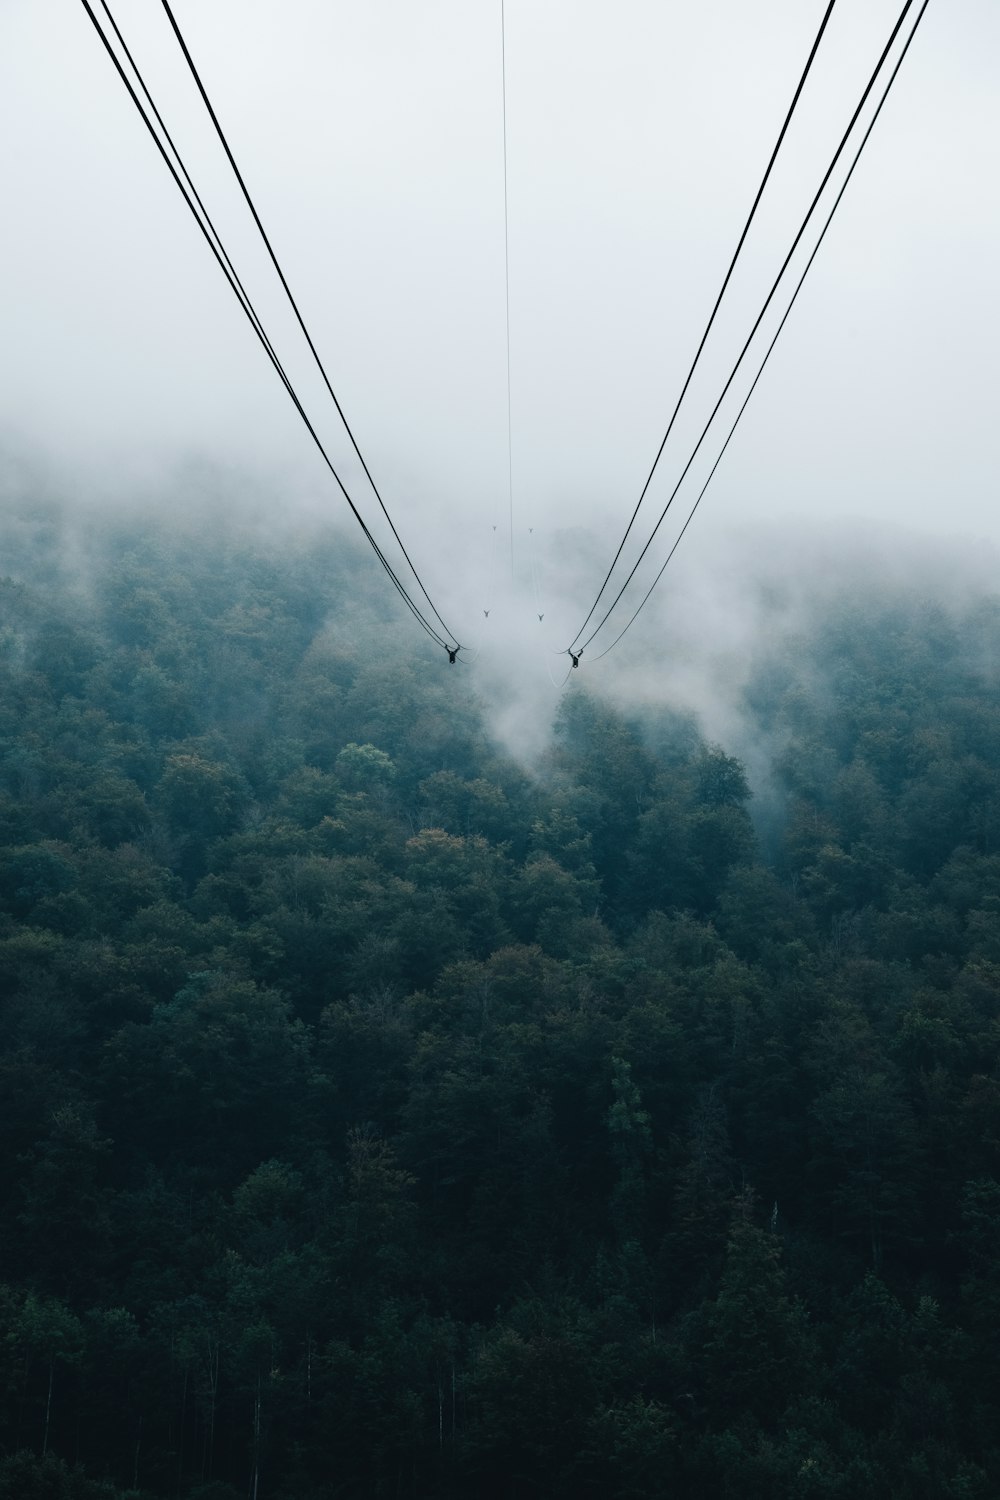 a view of some power lines in the middle of a forest